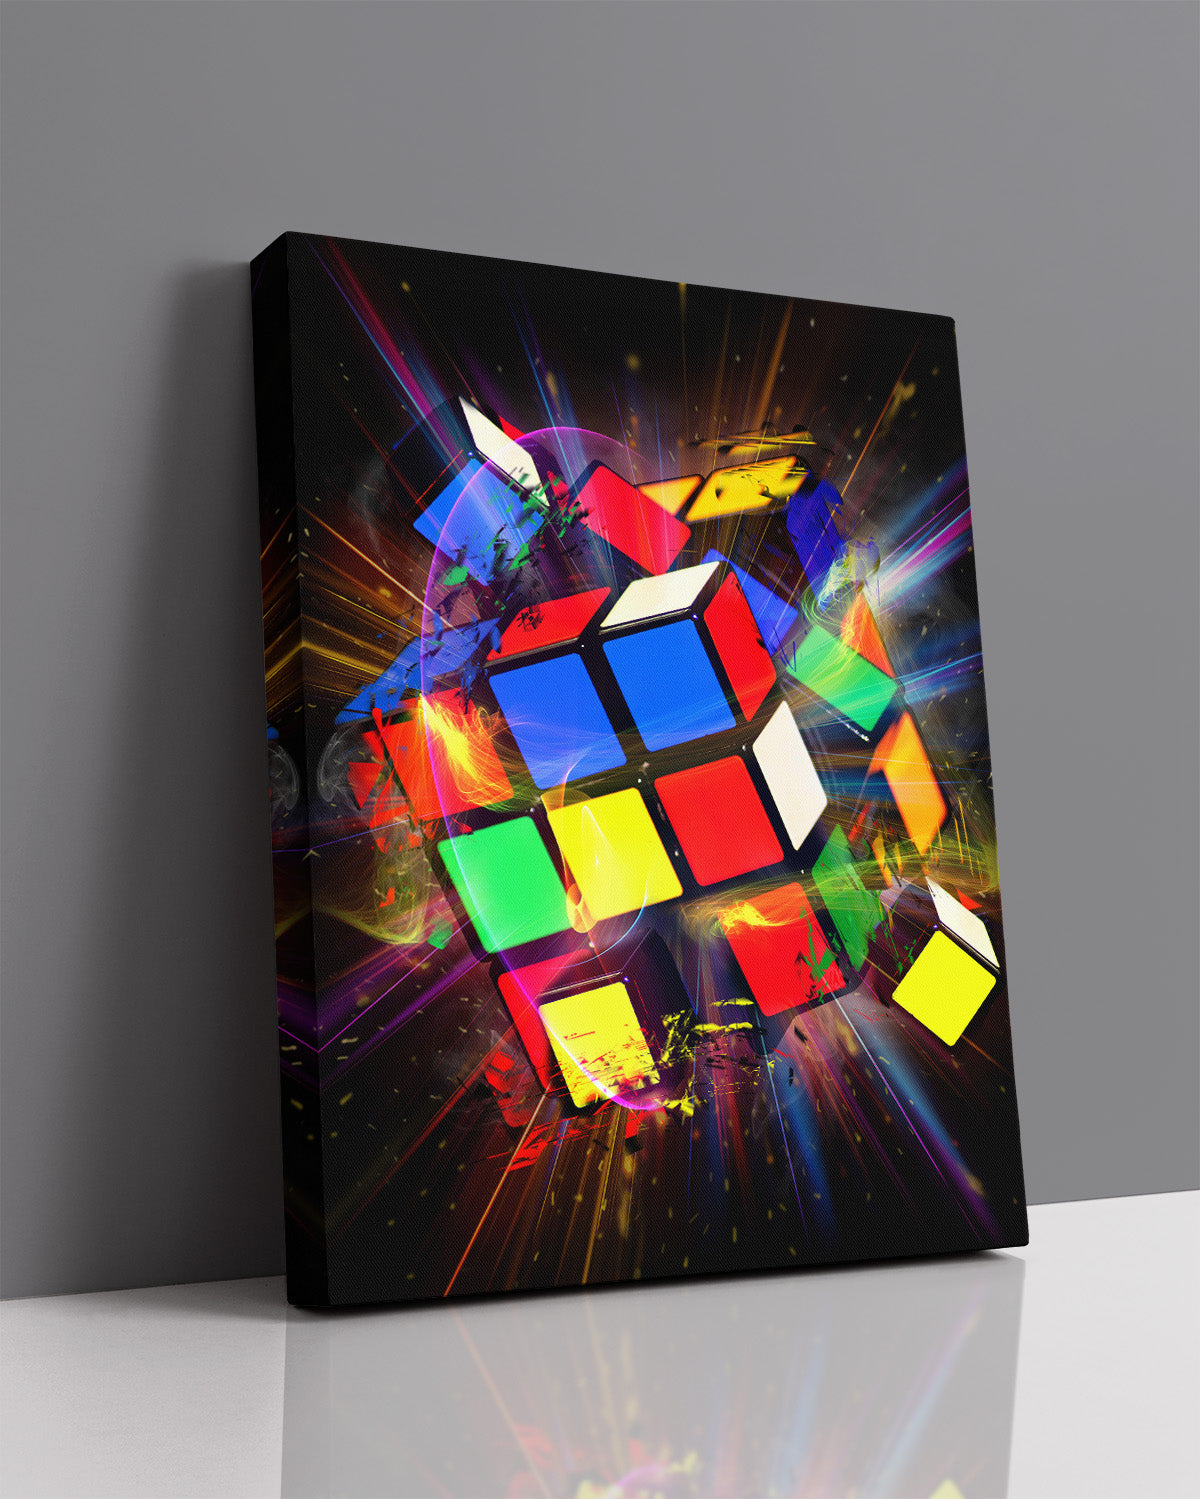 Exploding Rubik's Cube - Wall Art Decor Print with a black background